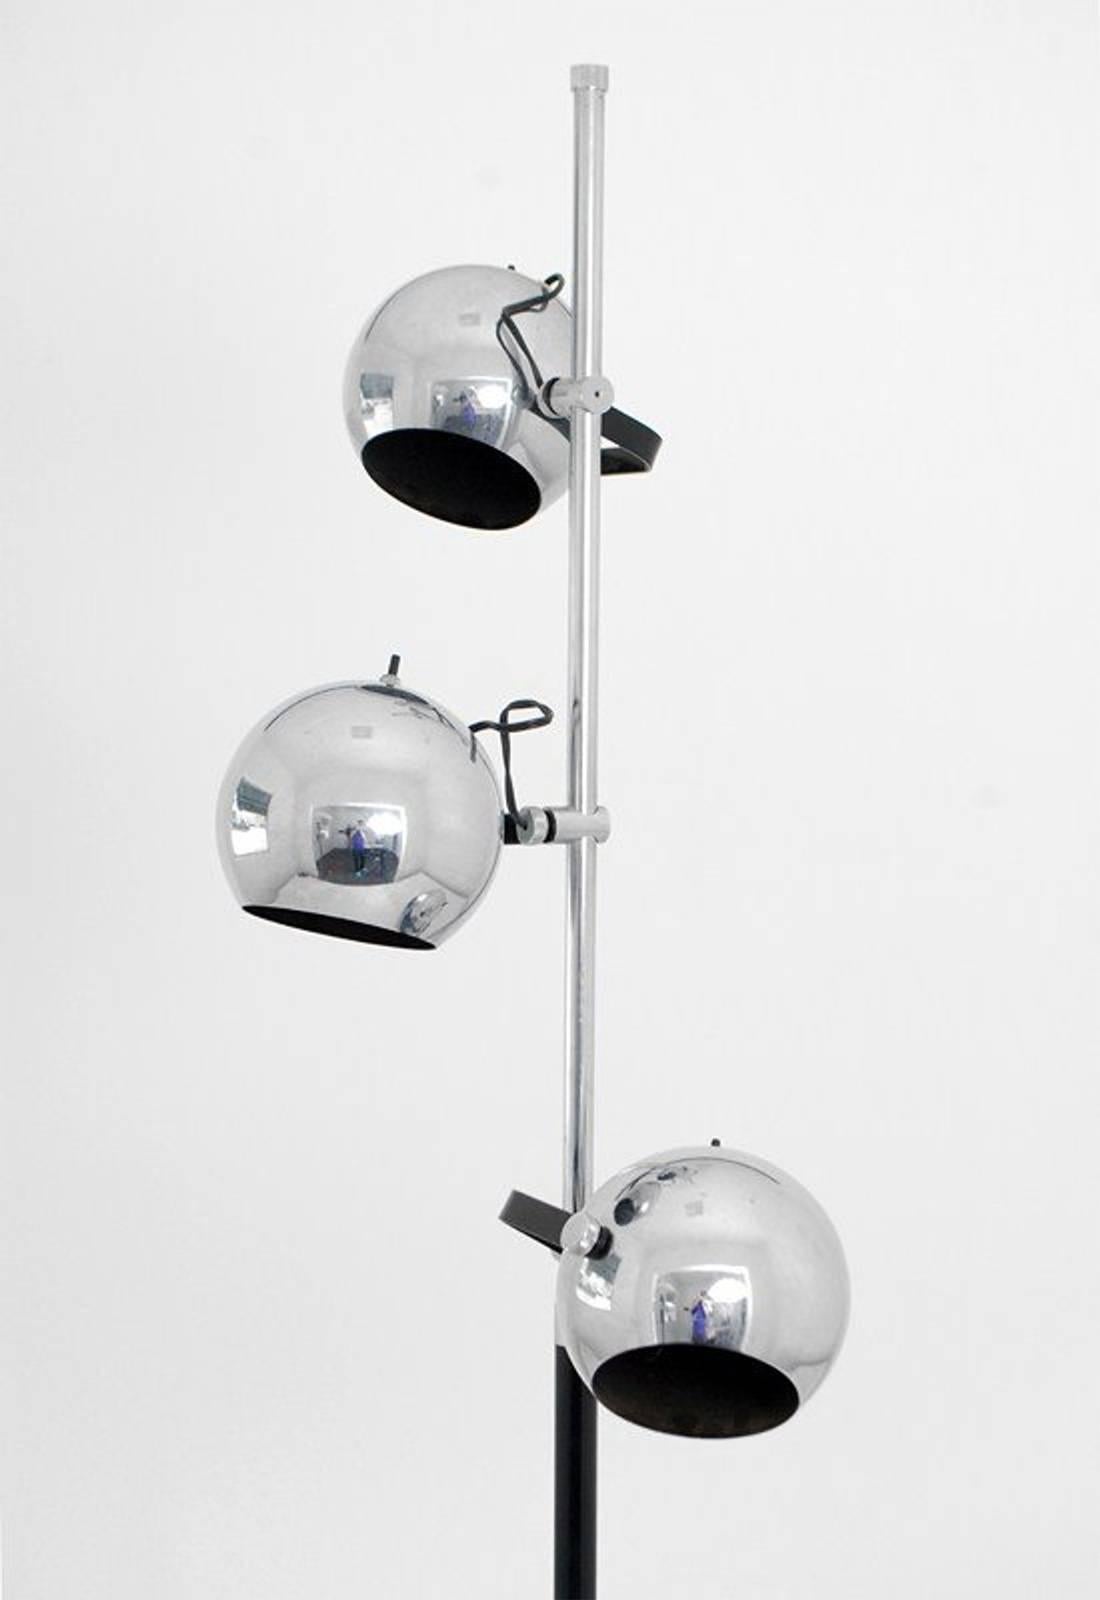 A 1960s floor lamp, style of Arredoluce consisting of three adjustable heads, each with its own on/off switch, mounted along a tubular center column (the top in chrome and the bottom in black-enameled steel). The underside of the Carrara marble base